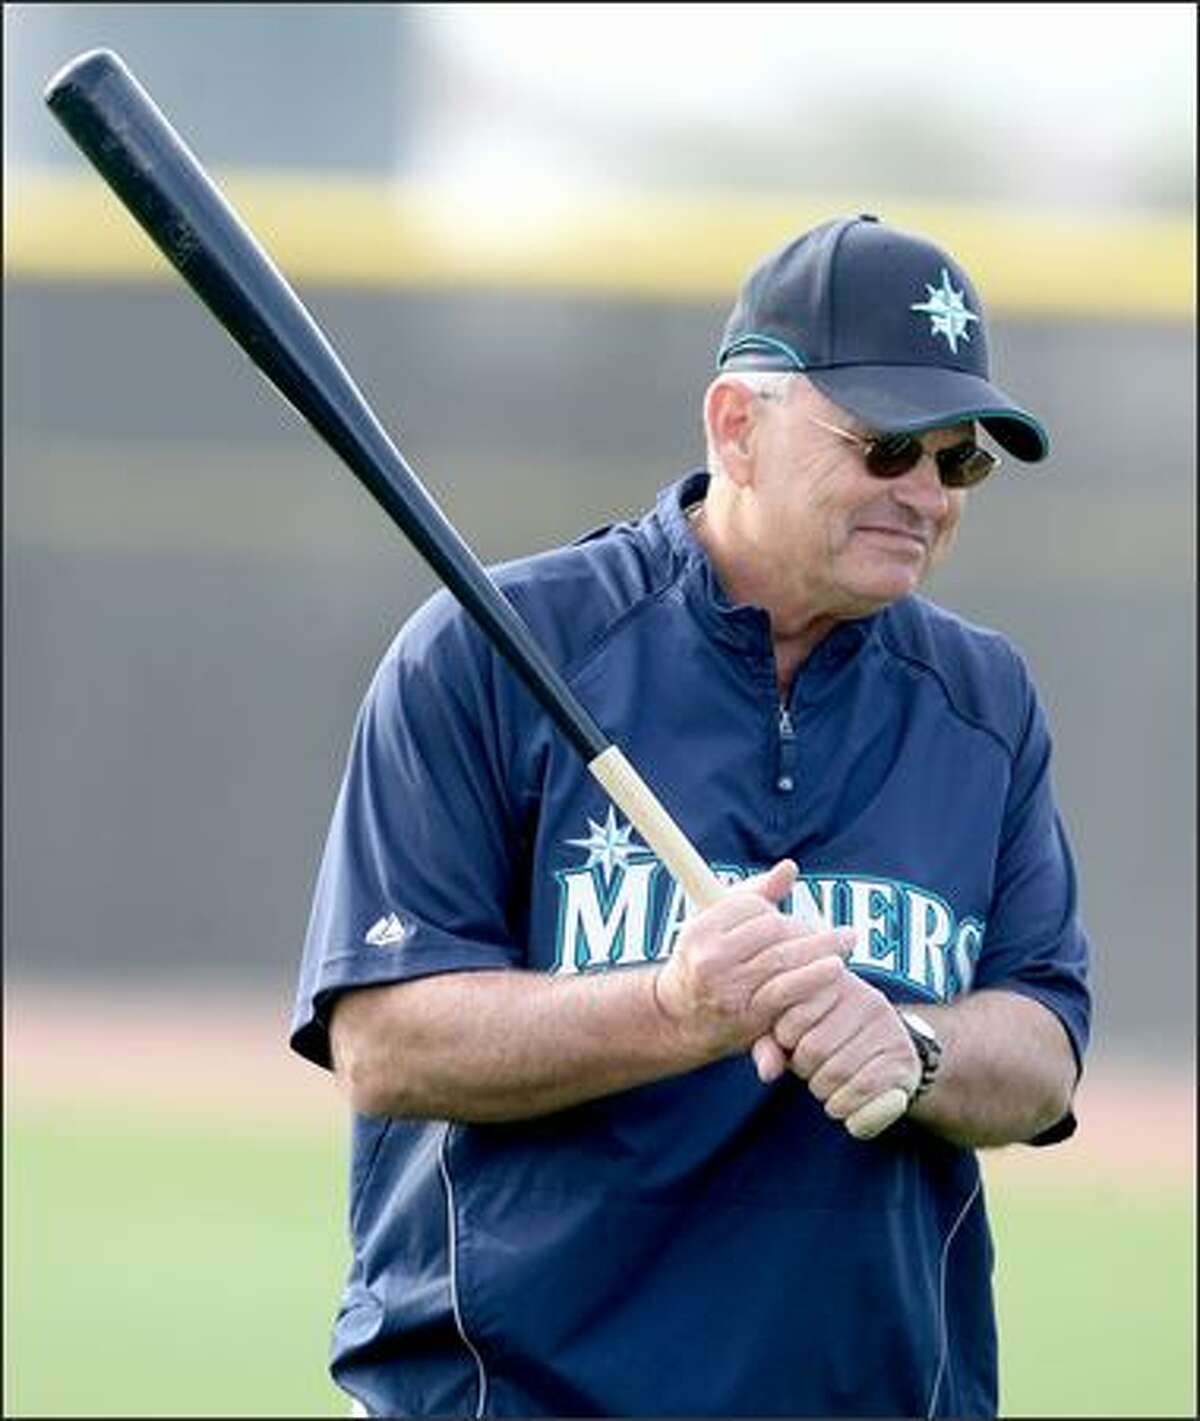 Mariners' manager John McLaren carries around a big stick at the first full squad workout of the Seattle Mariners at the Mariners training facility in Peoria, Ariz. on Wedday February 20, 2008.